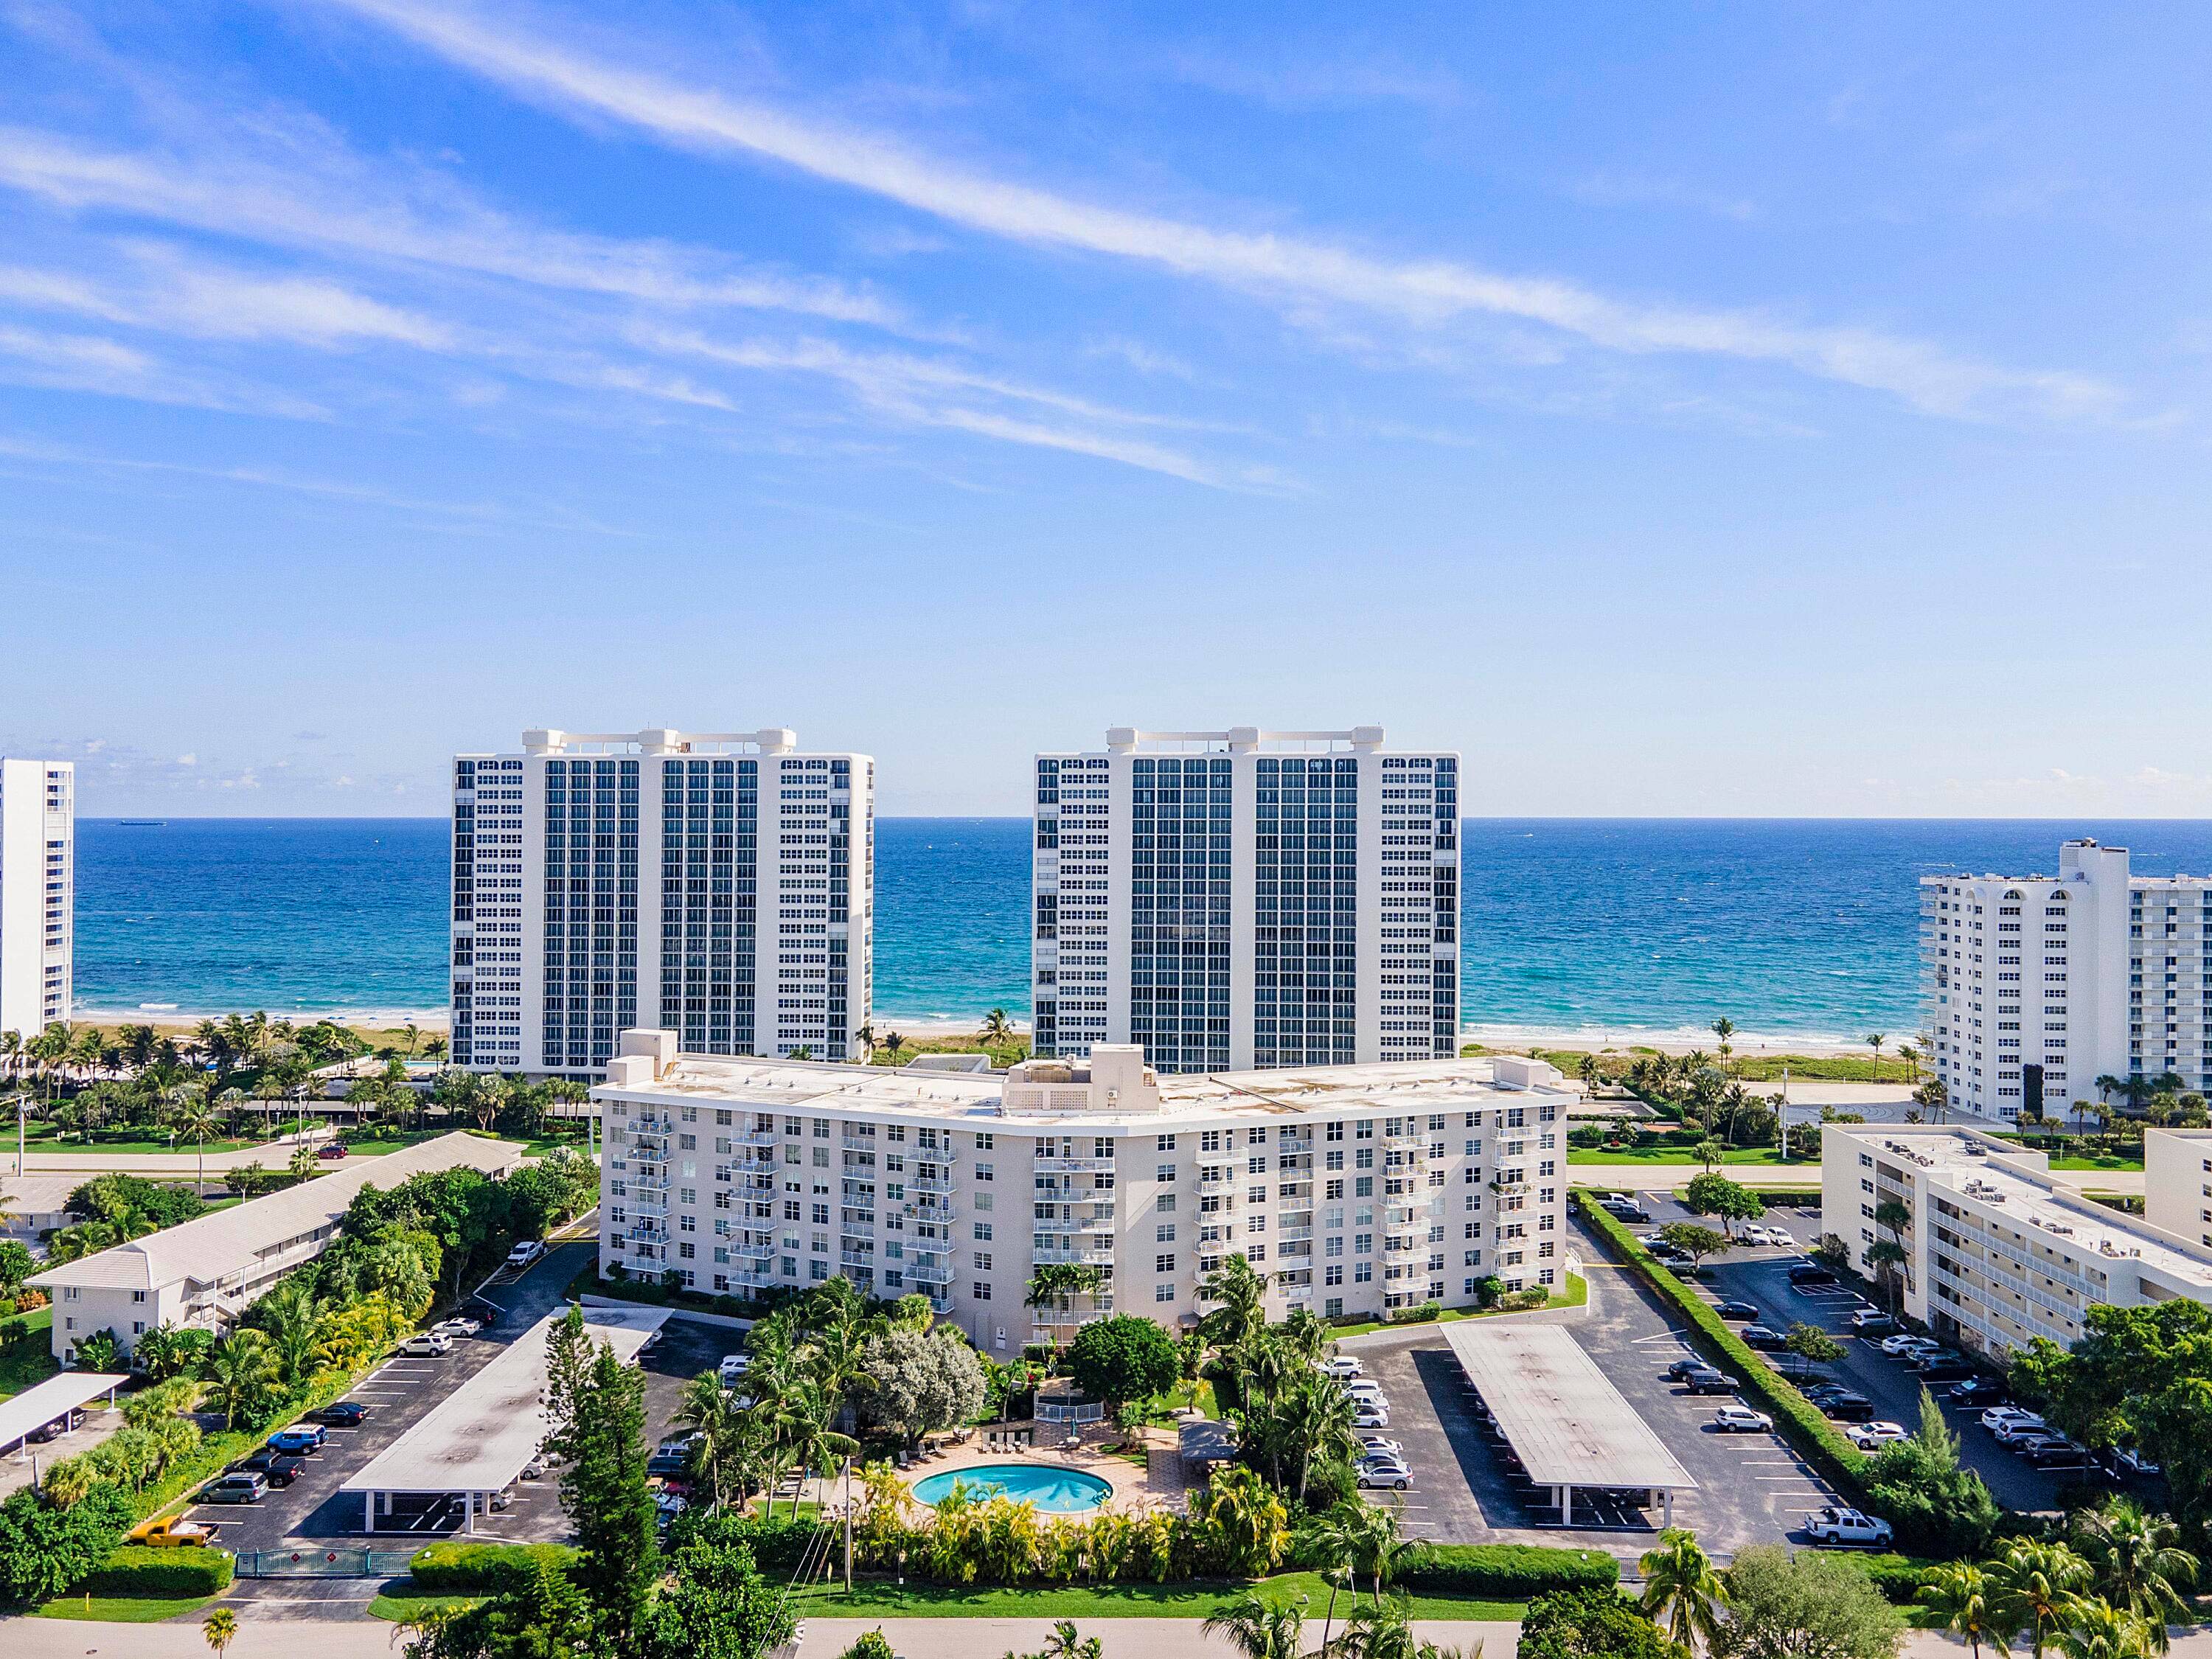 EXCEPTIONAL OPPORTUNITY TOESCAPE THE COLD AND SPEND THE WINTER SEASON BEACHSIDE IN THIS BEAUTIFUL UPDATED AND FULLY FURNISHED GROUND FLOOR BOCA RATON BEACH CONDO !